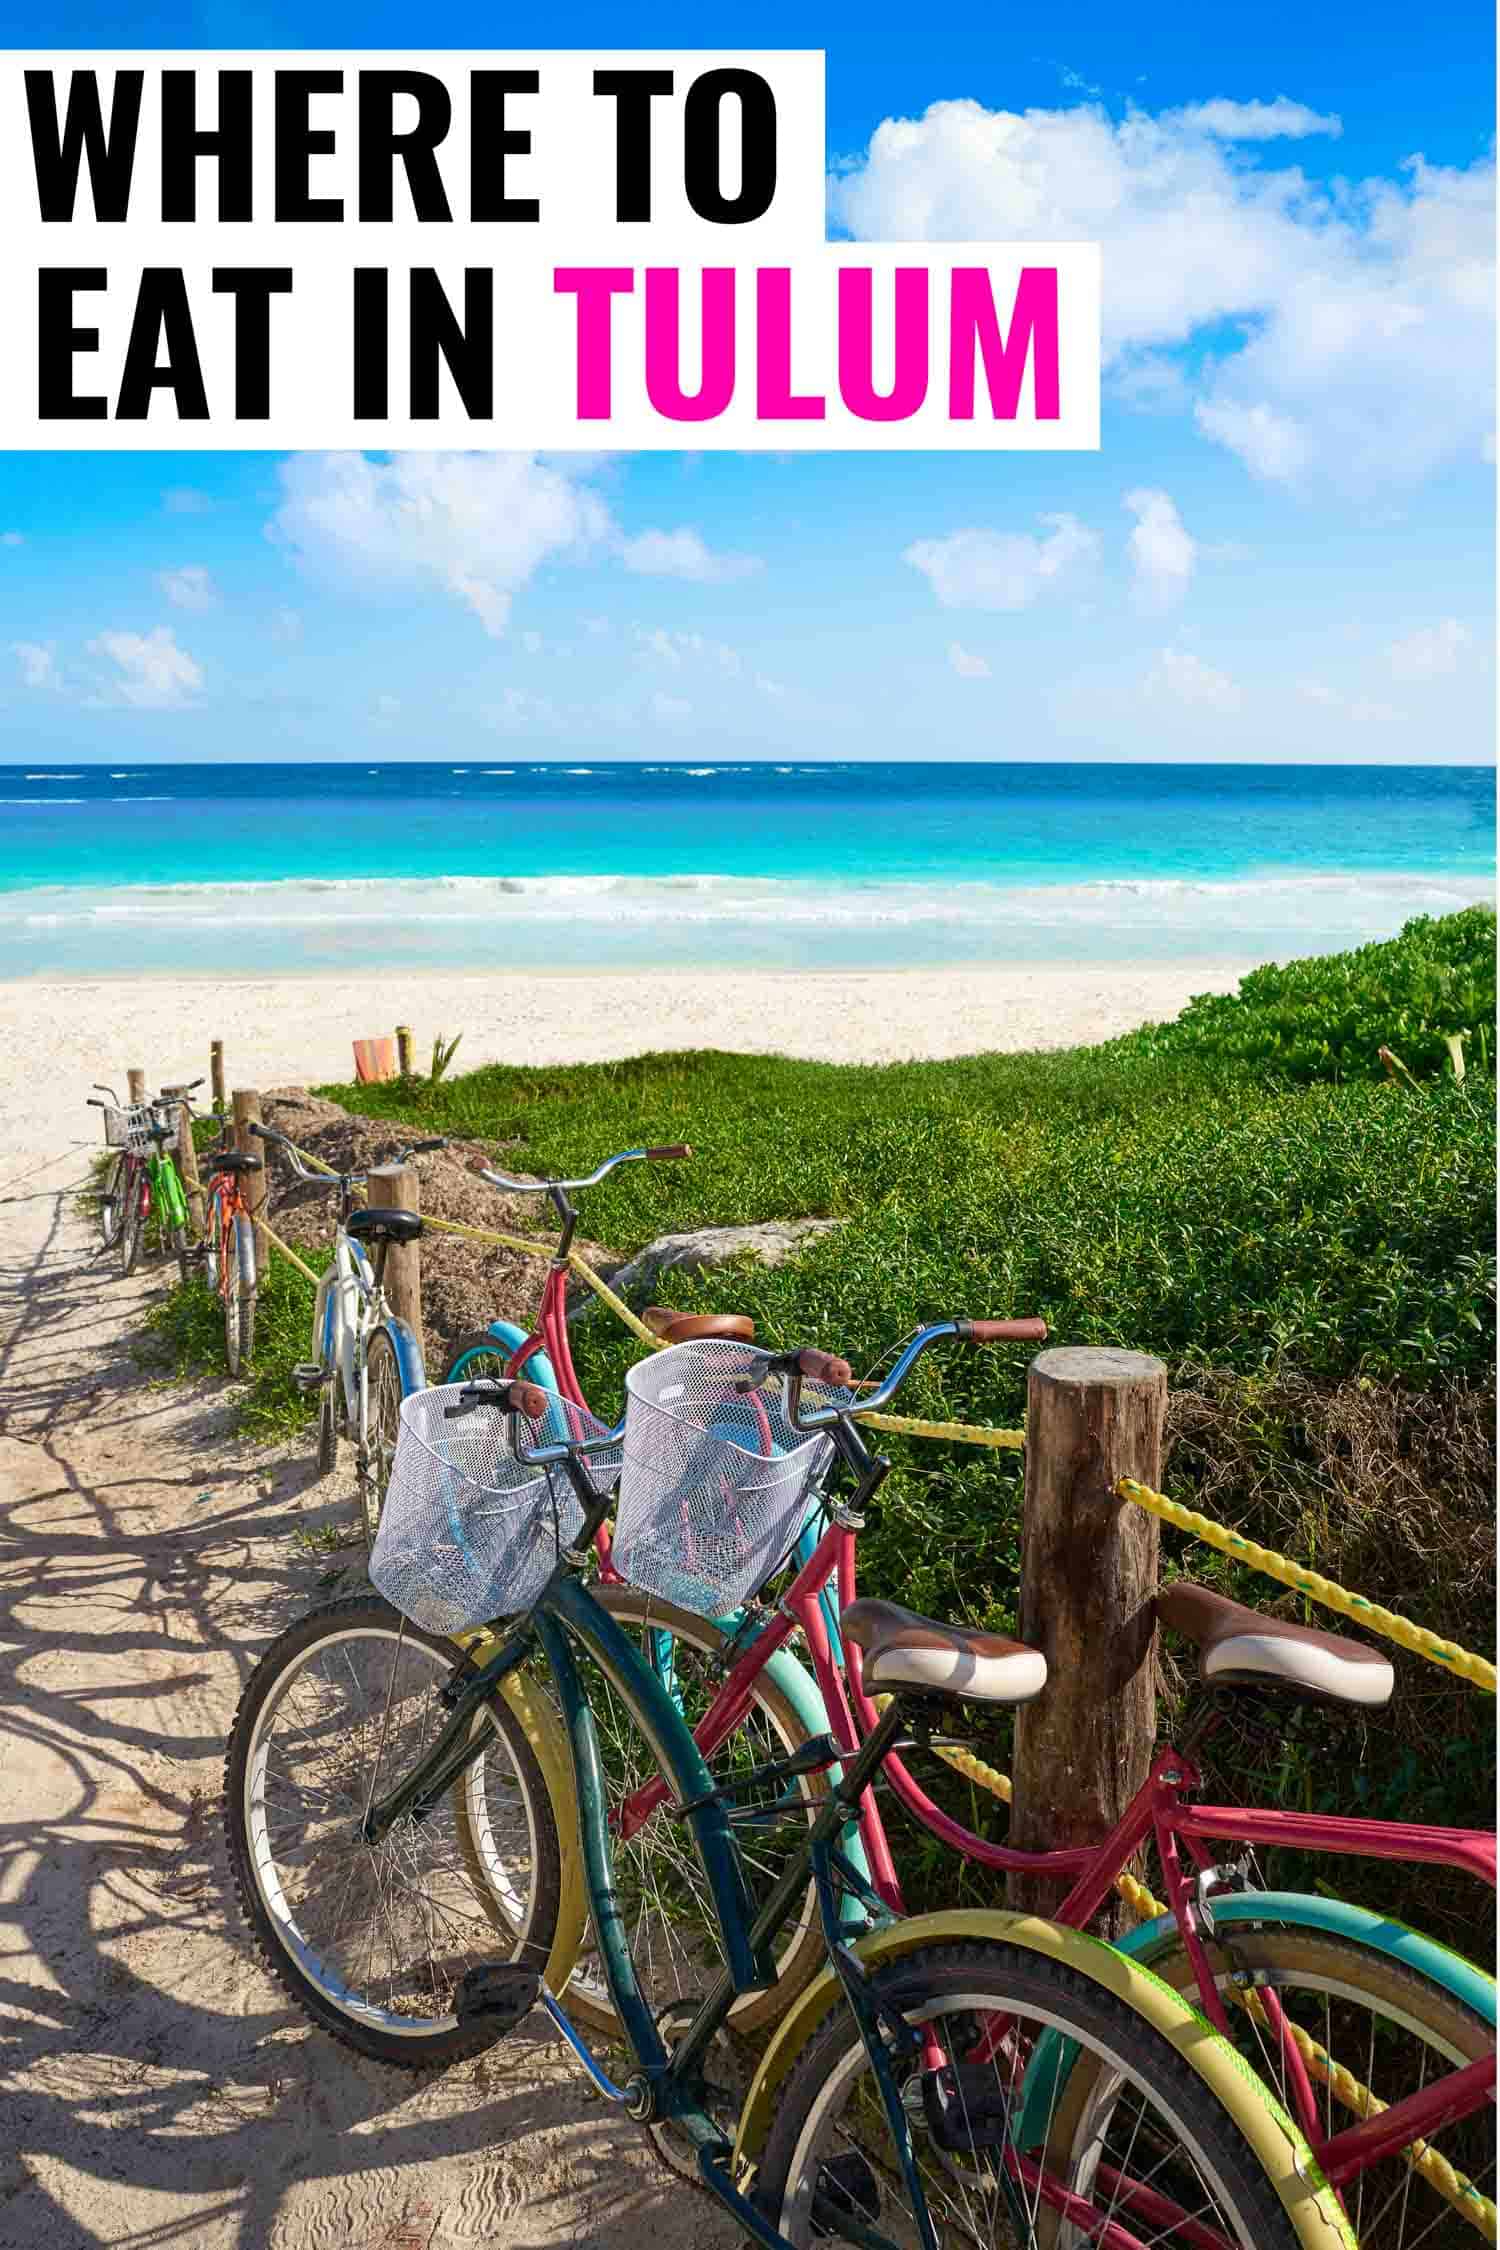 Tulum Mexico beach with bicycles